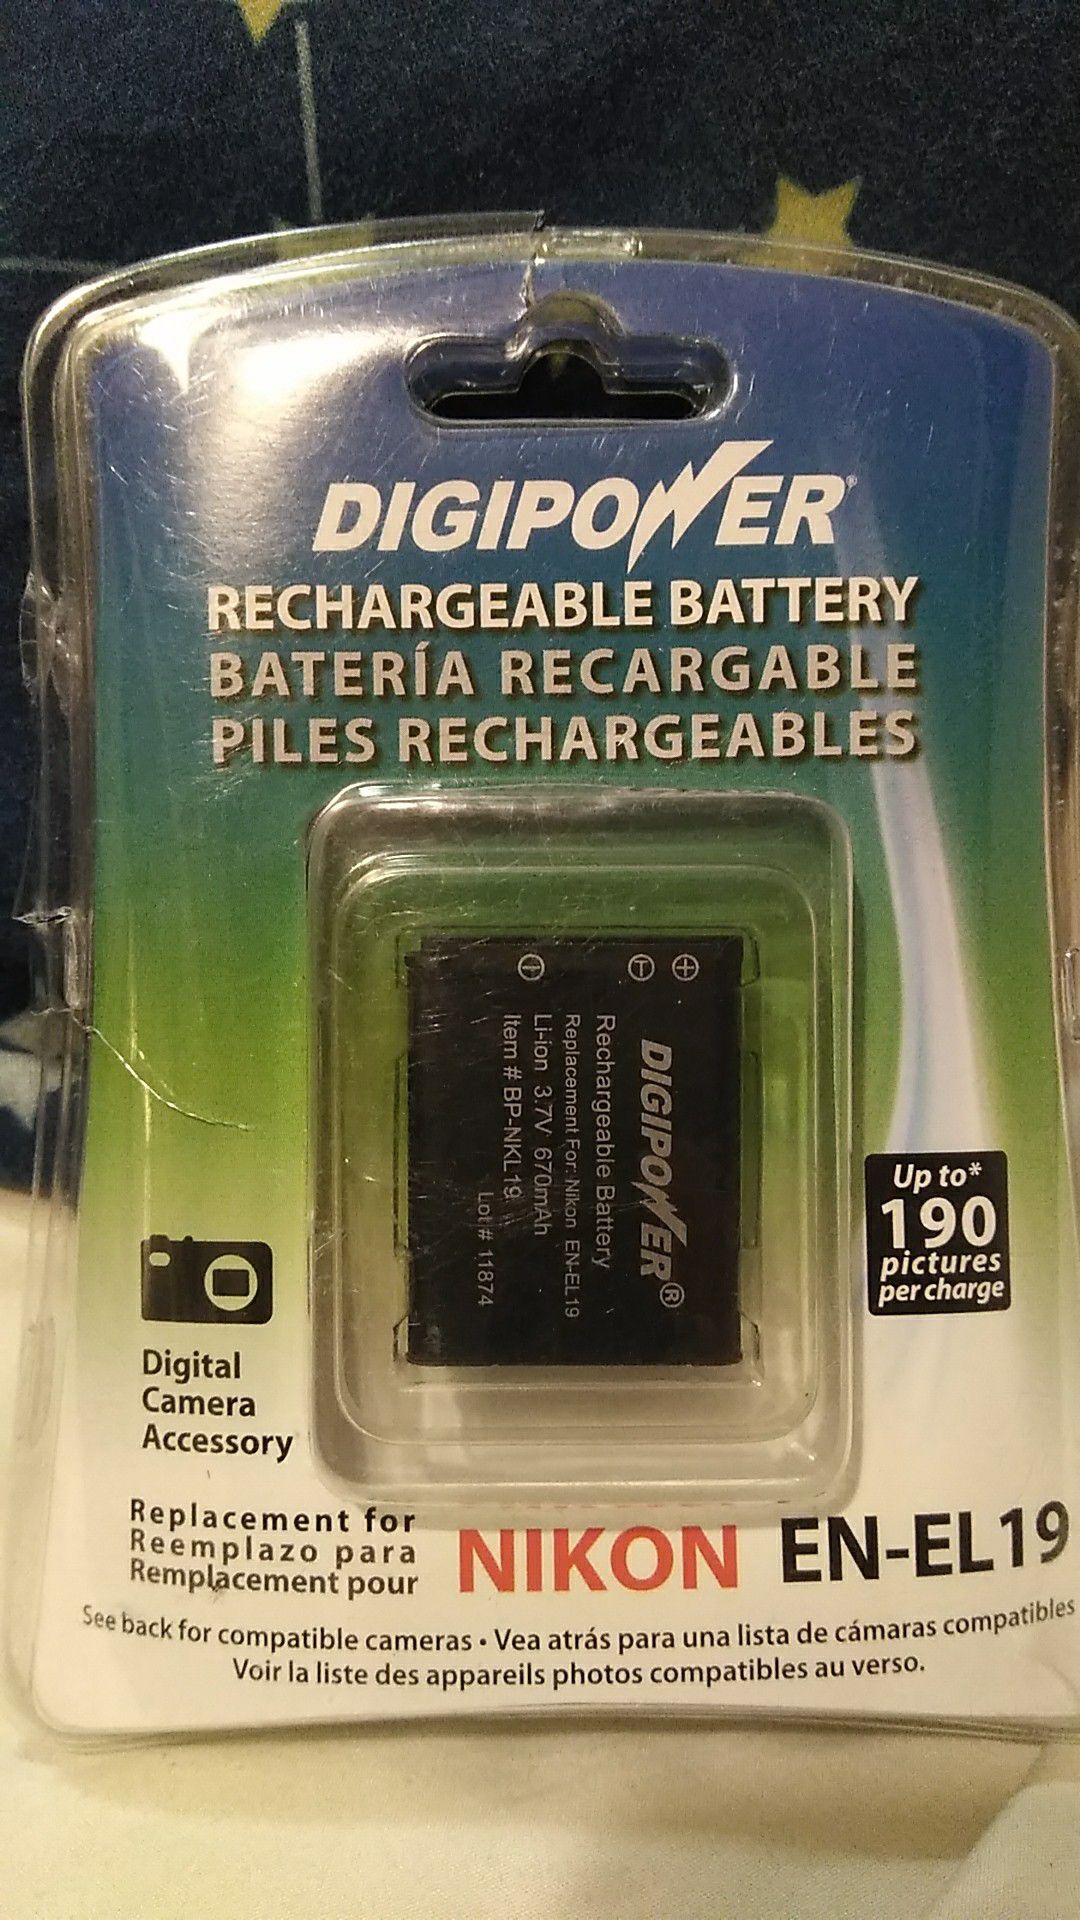 Replacement battery for a Nikon digital camera